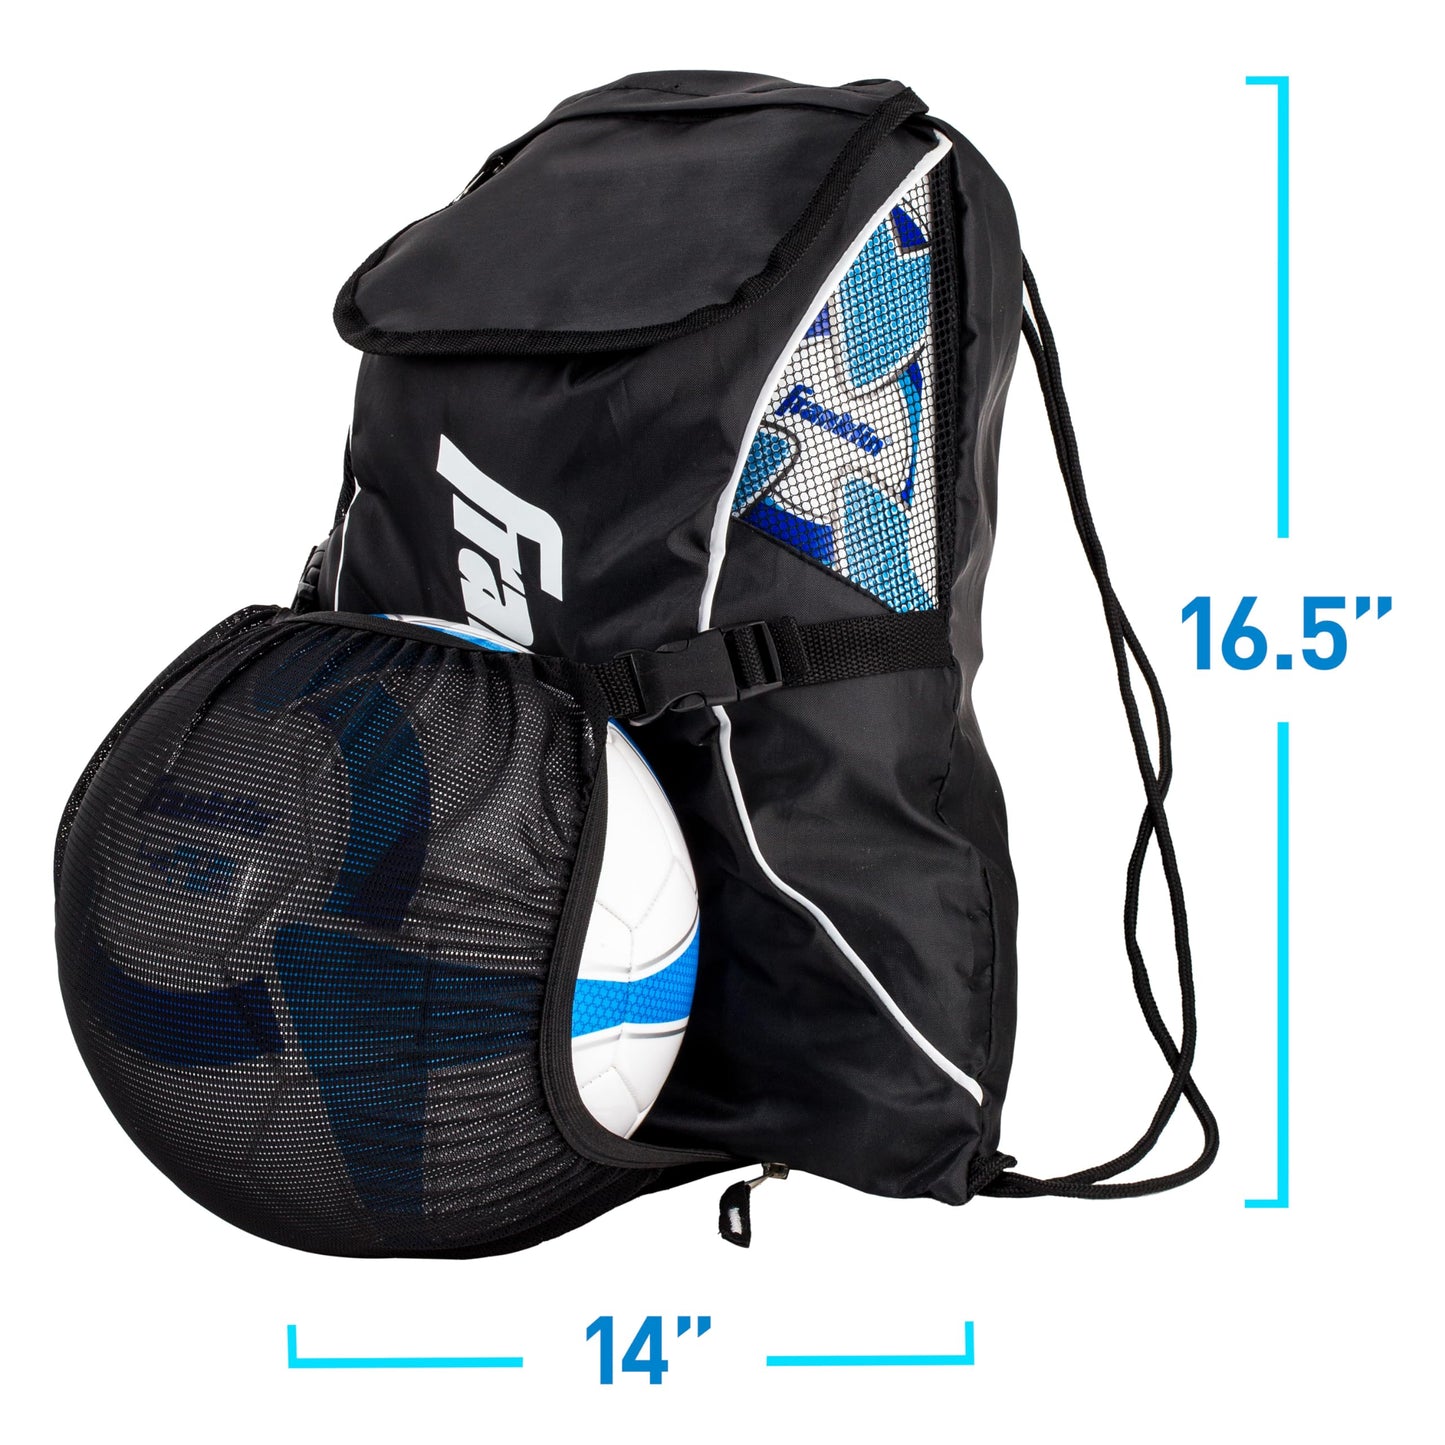 ports Soccer Bags - Deluxe Soccer Backpacks with Ball Holder